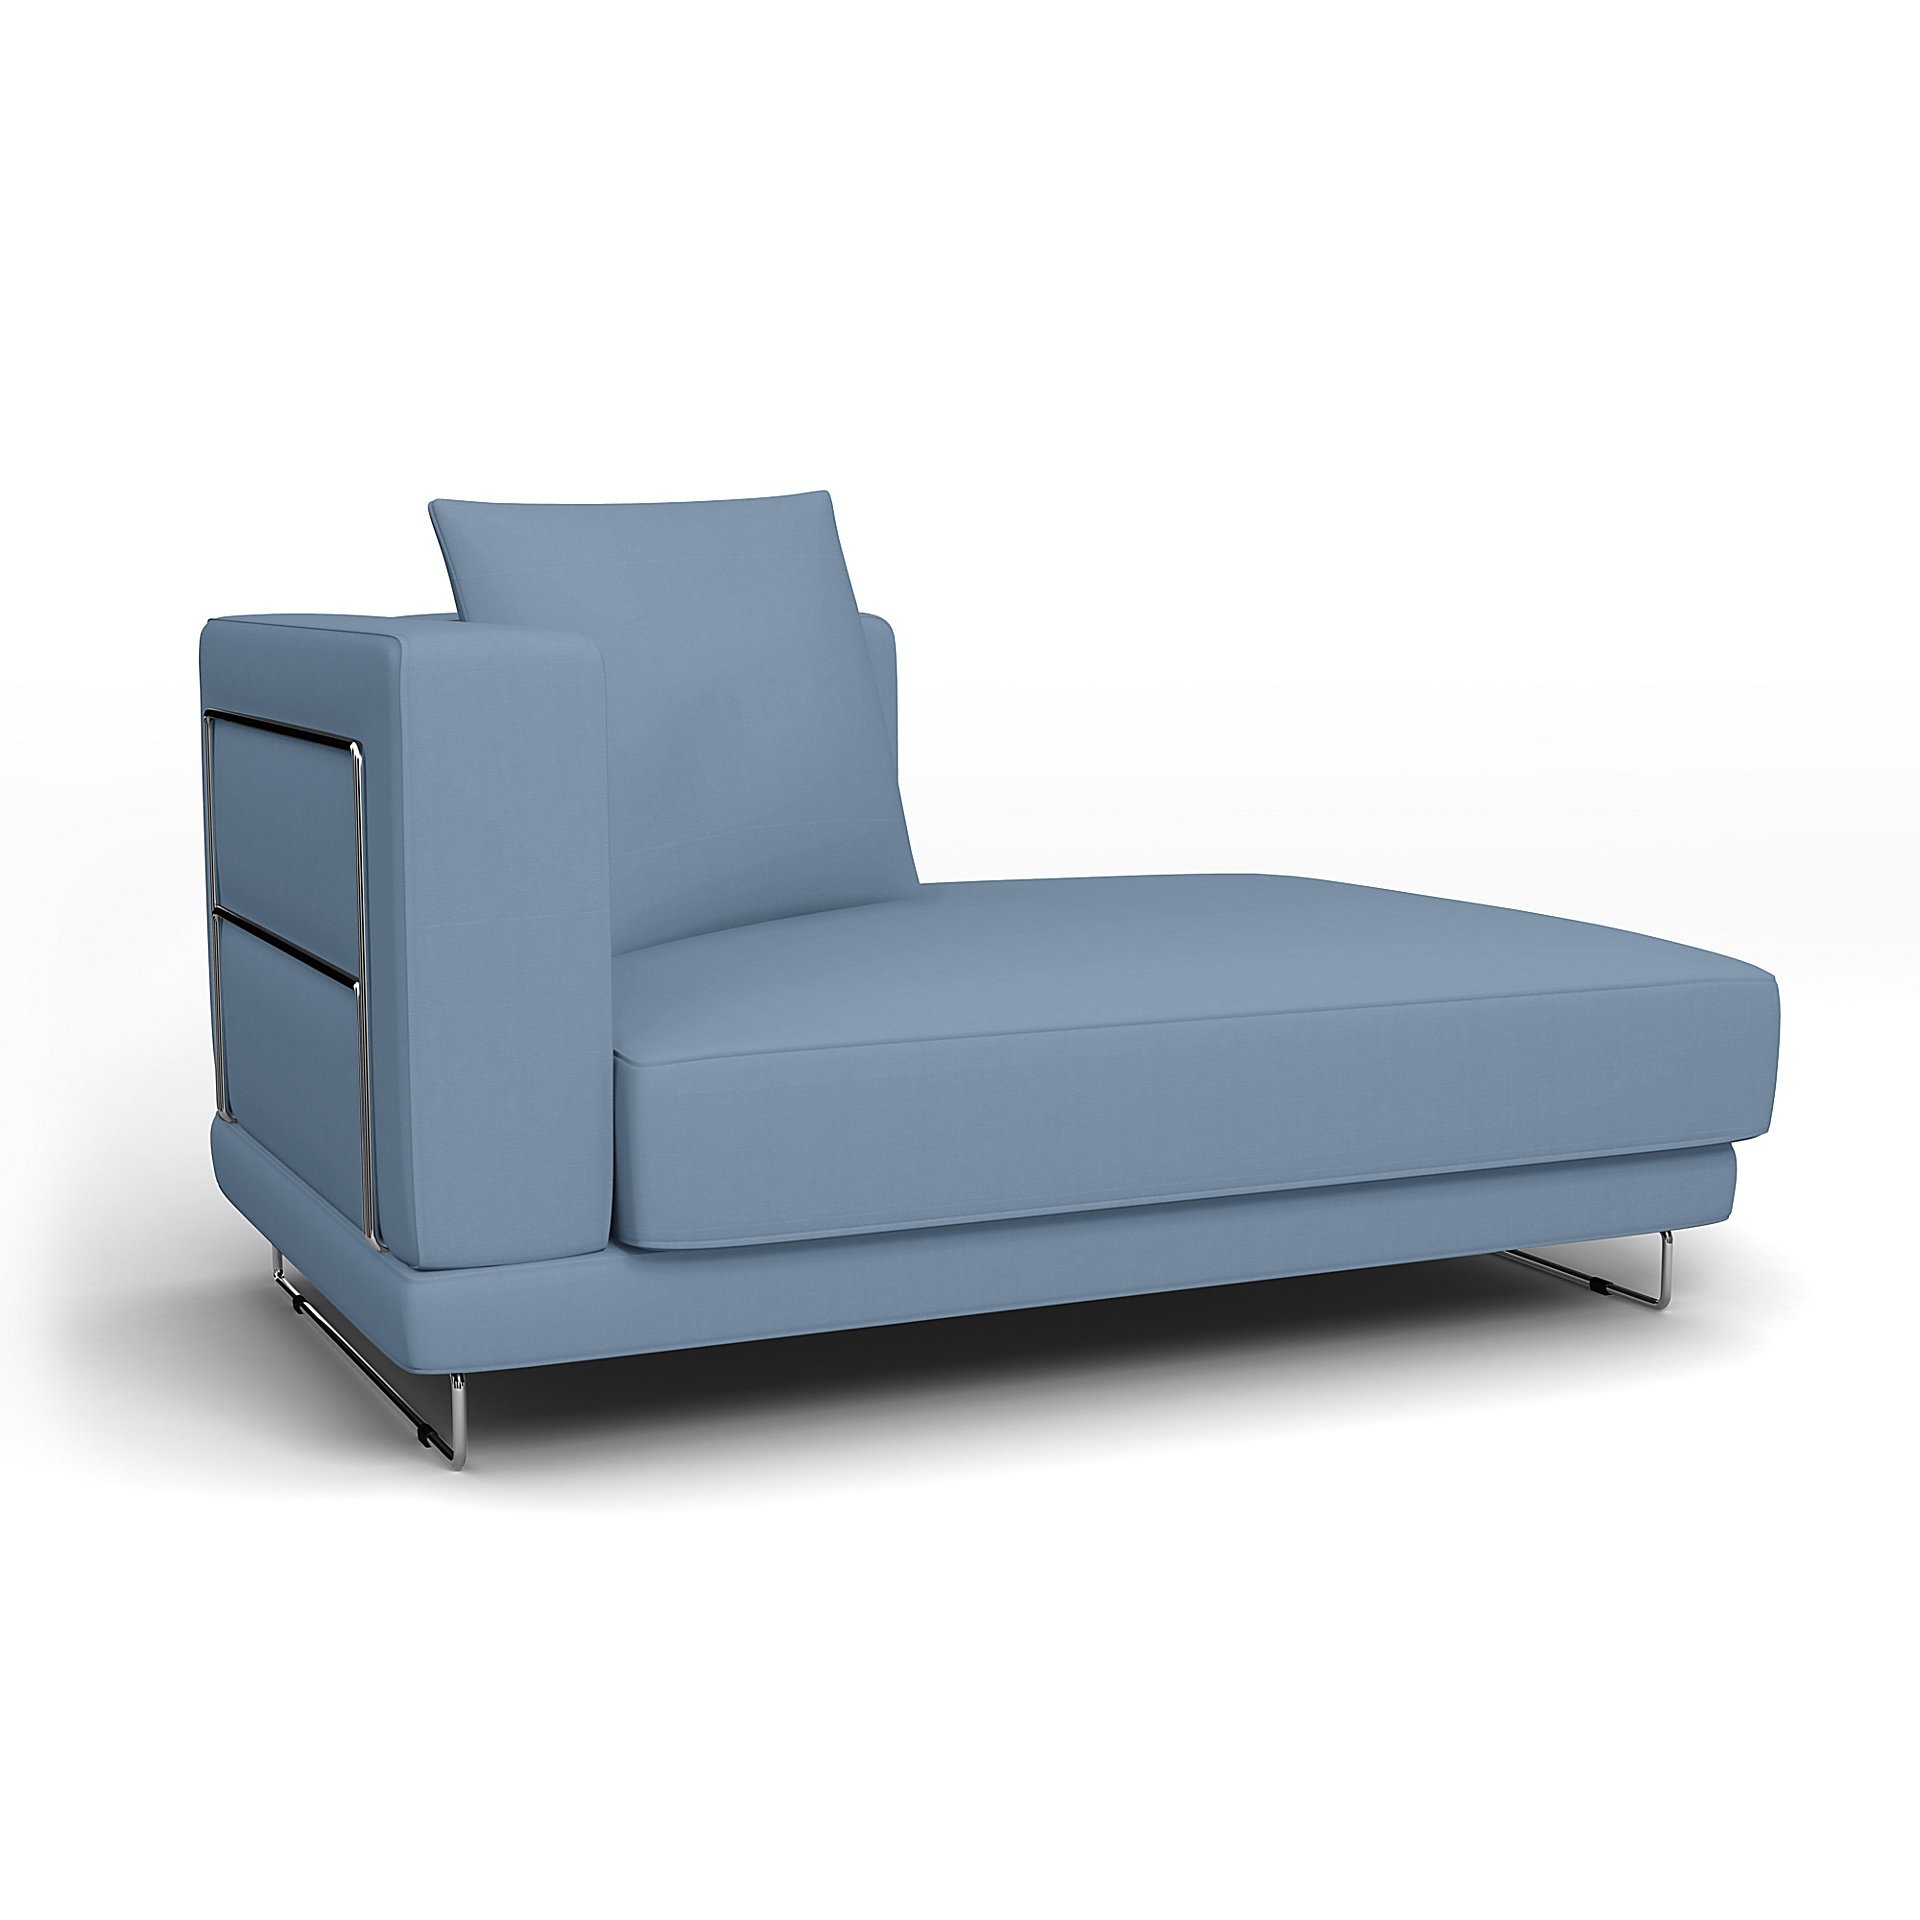 IKEA - Tylosand Chaise with Right Armrest Cover, Dusty Blue, Cotton - Bemz